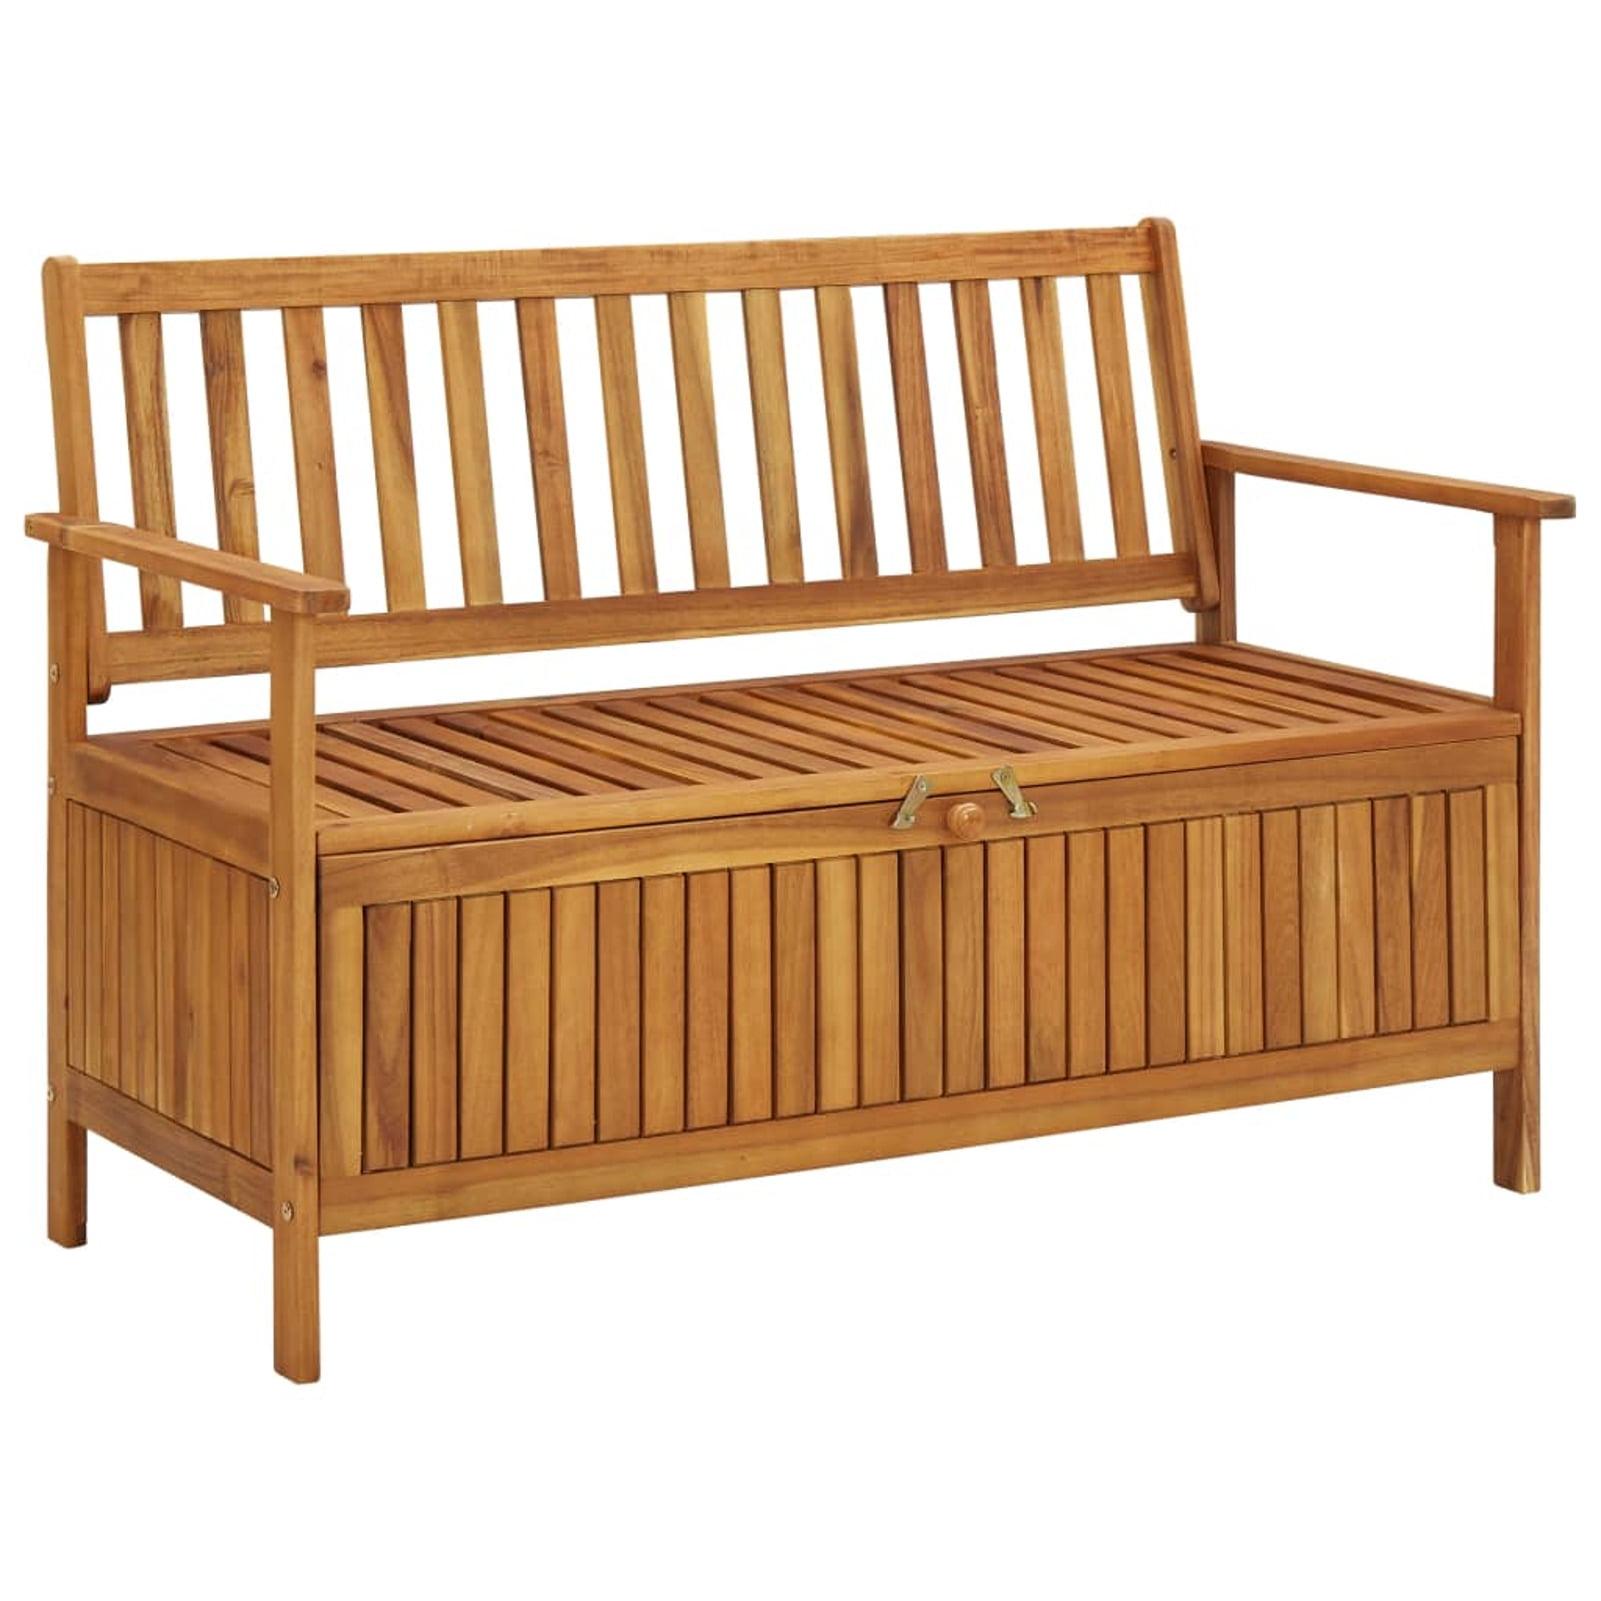 47.2" Brown Acacia Wood Patio Storage Bench with Armrests